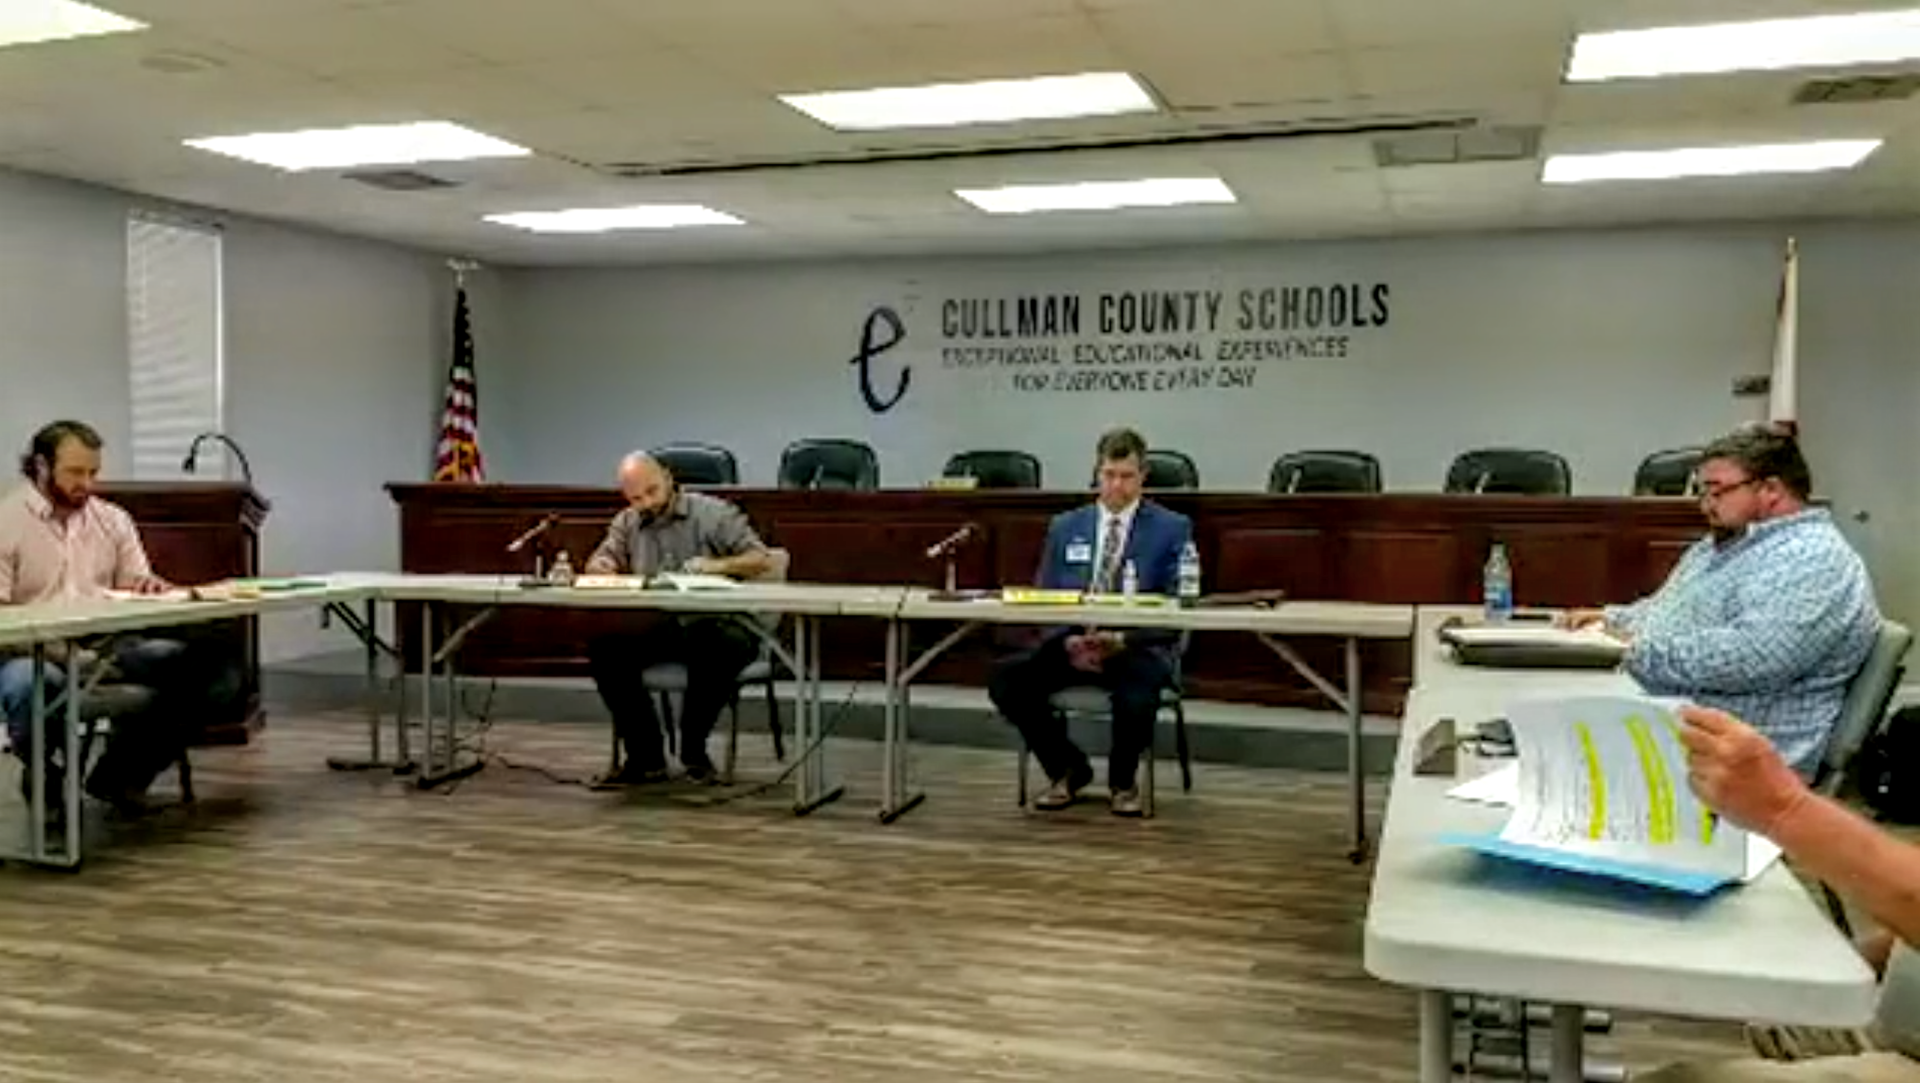 CCBOE discusses plans for returning to class - The Cullman Tribune